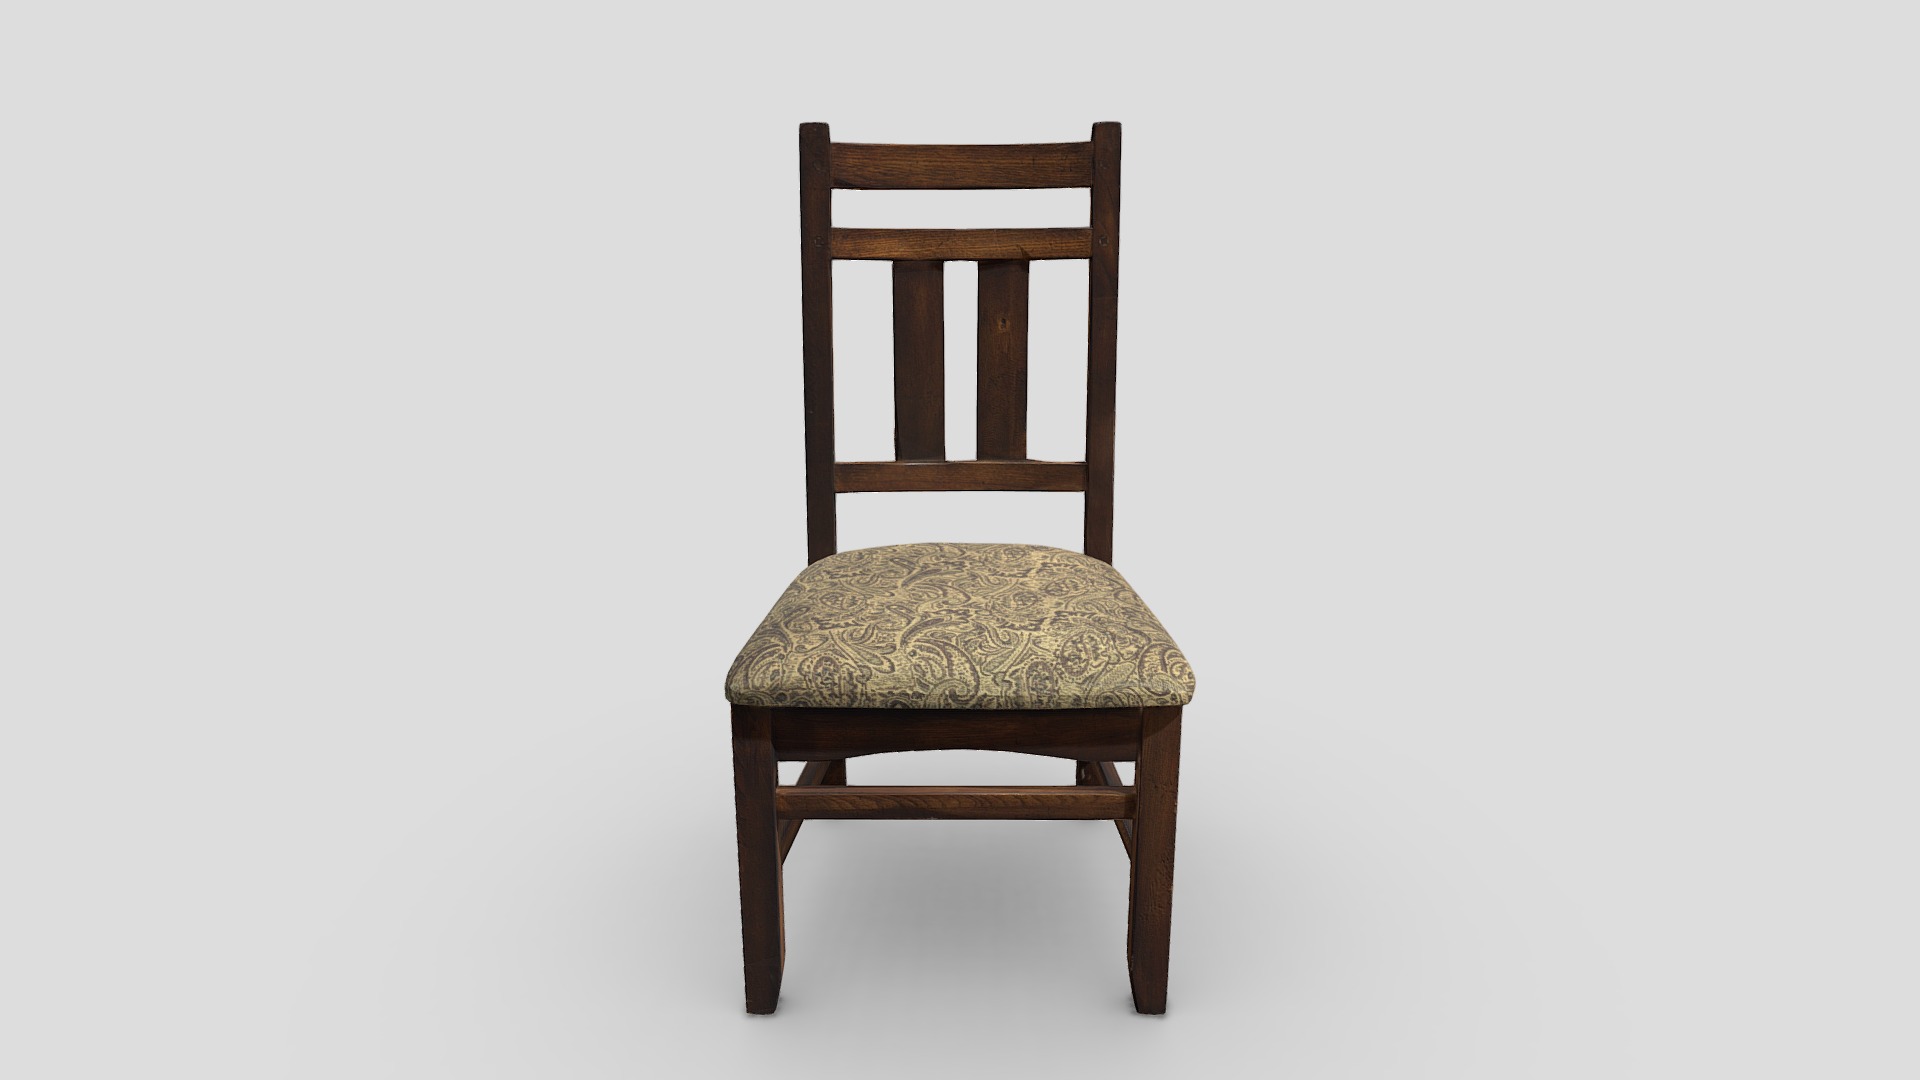 3D model Kitchen Chair - This is a 3D model of the Kitchen Chair. The 3D model is about a wooden chair with a cushion.